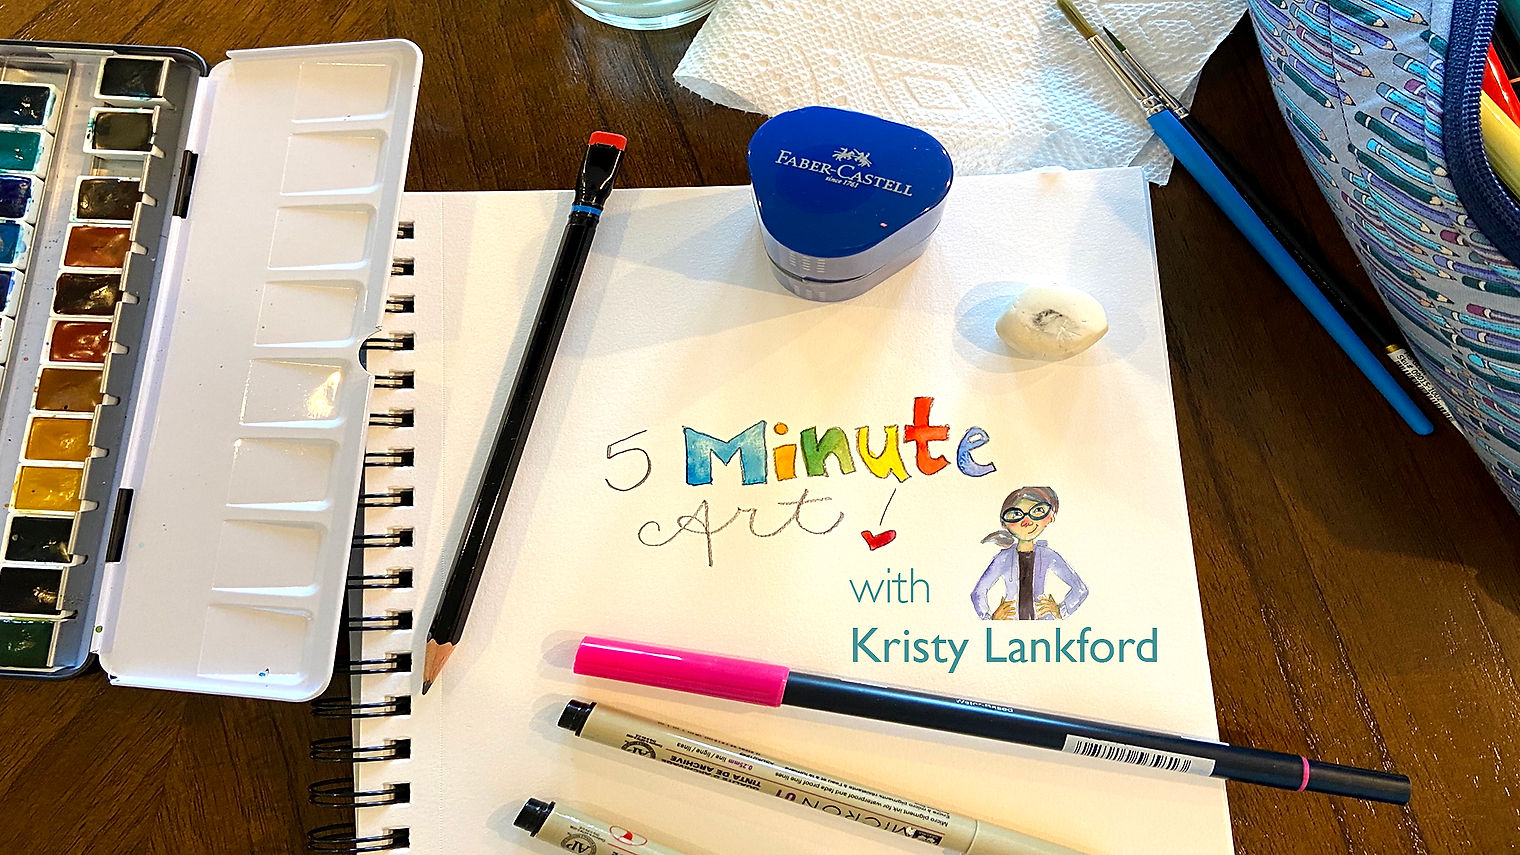 5 Minute Art with Kristy Lankford